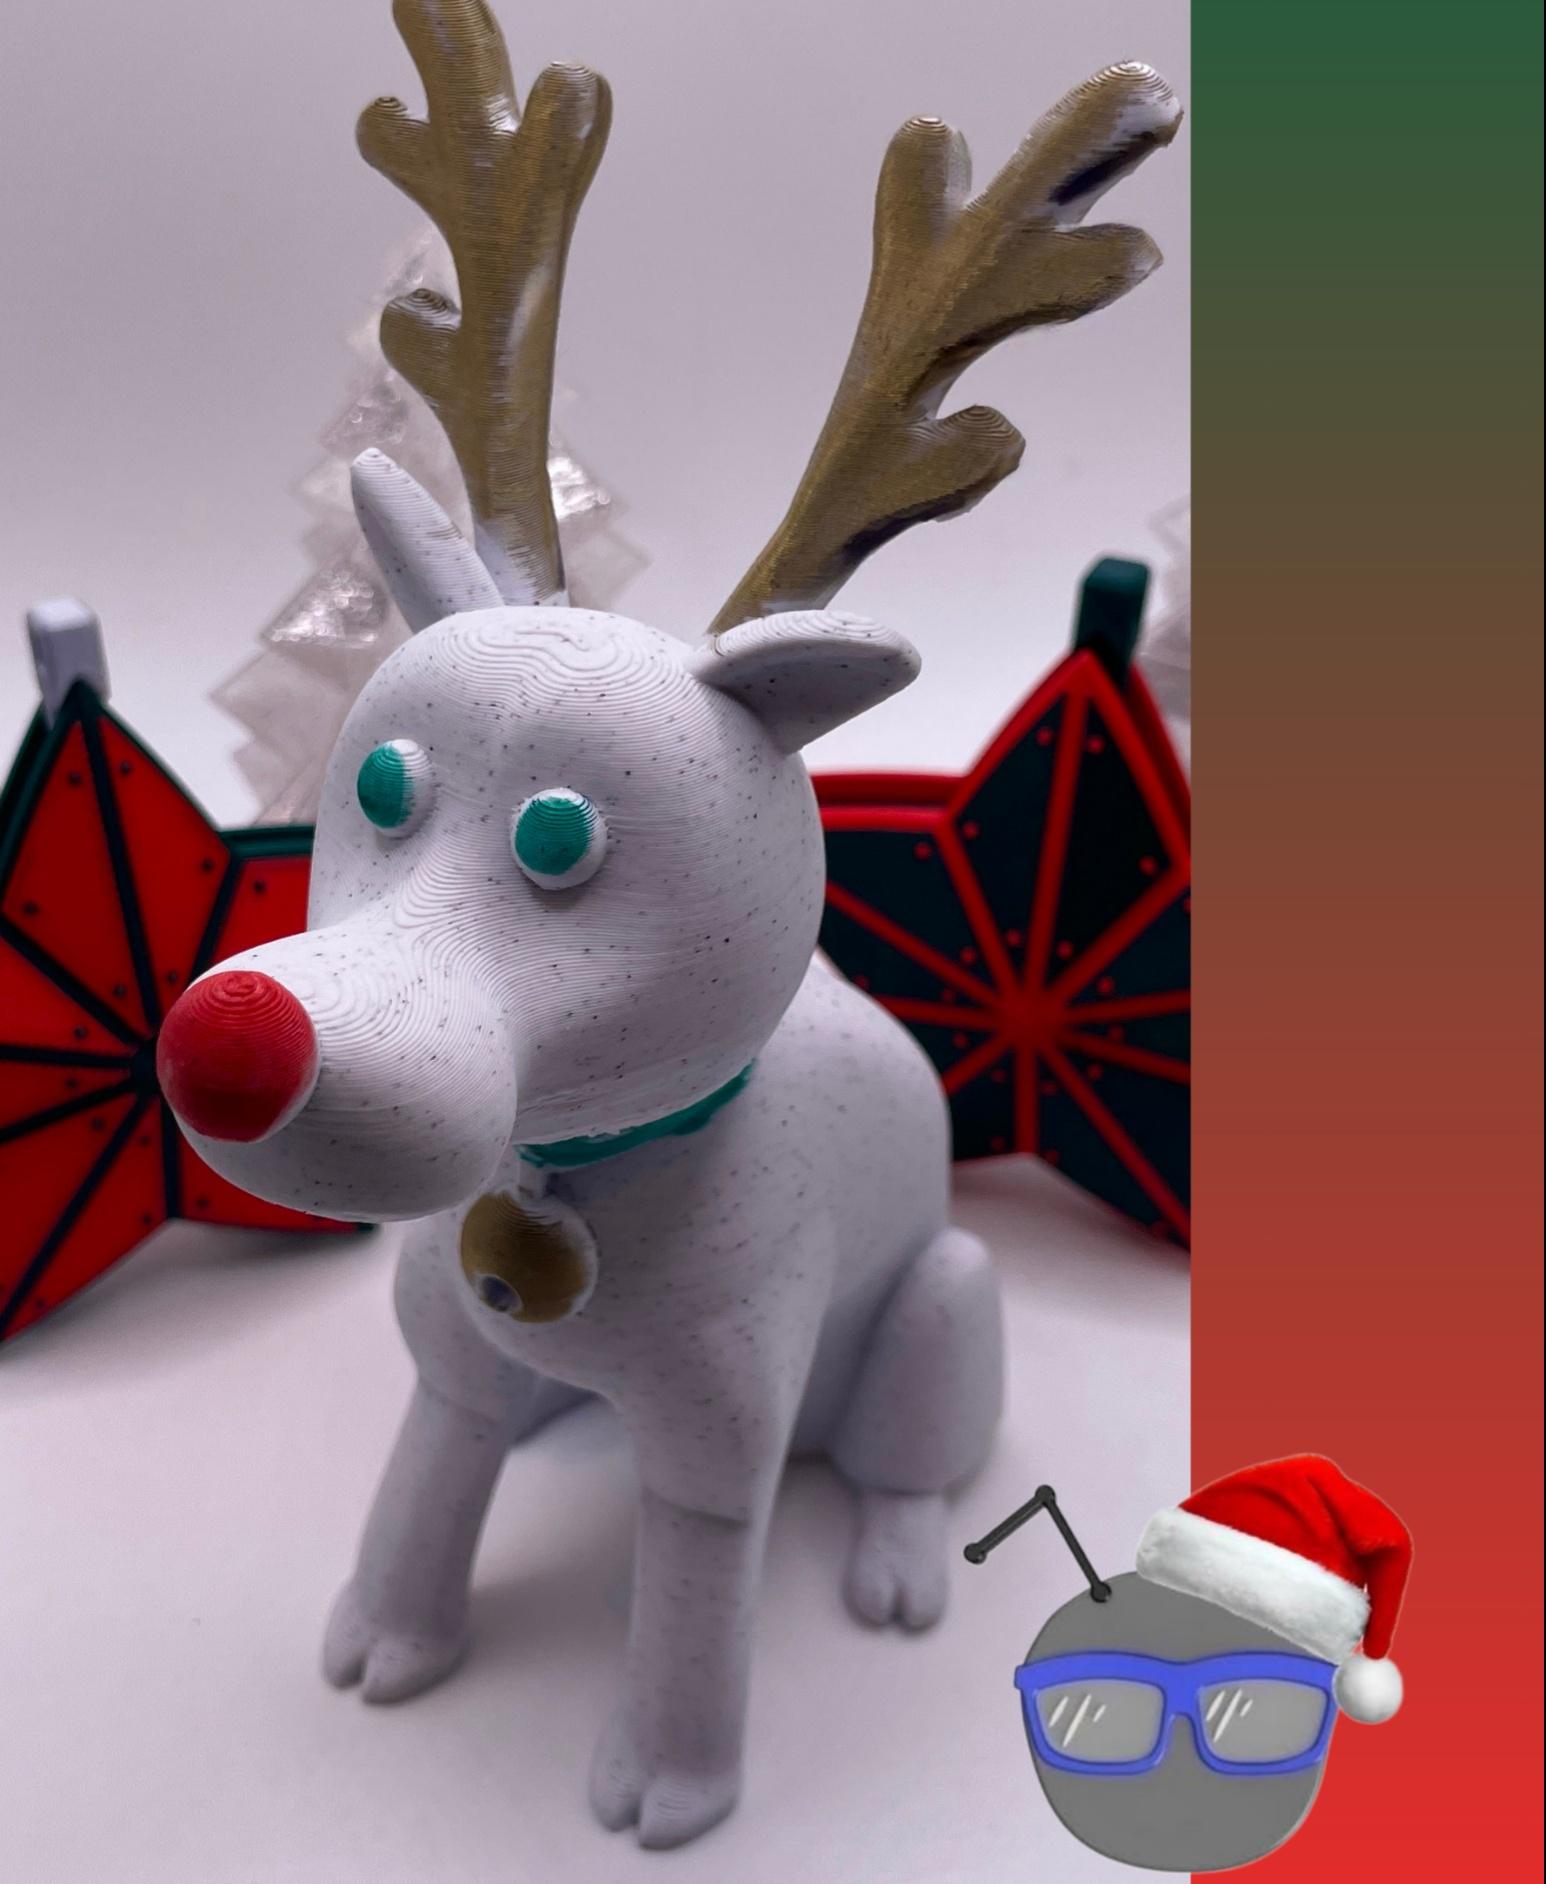 Rudolph the red nose SnowDog 3d model